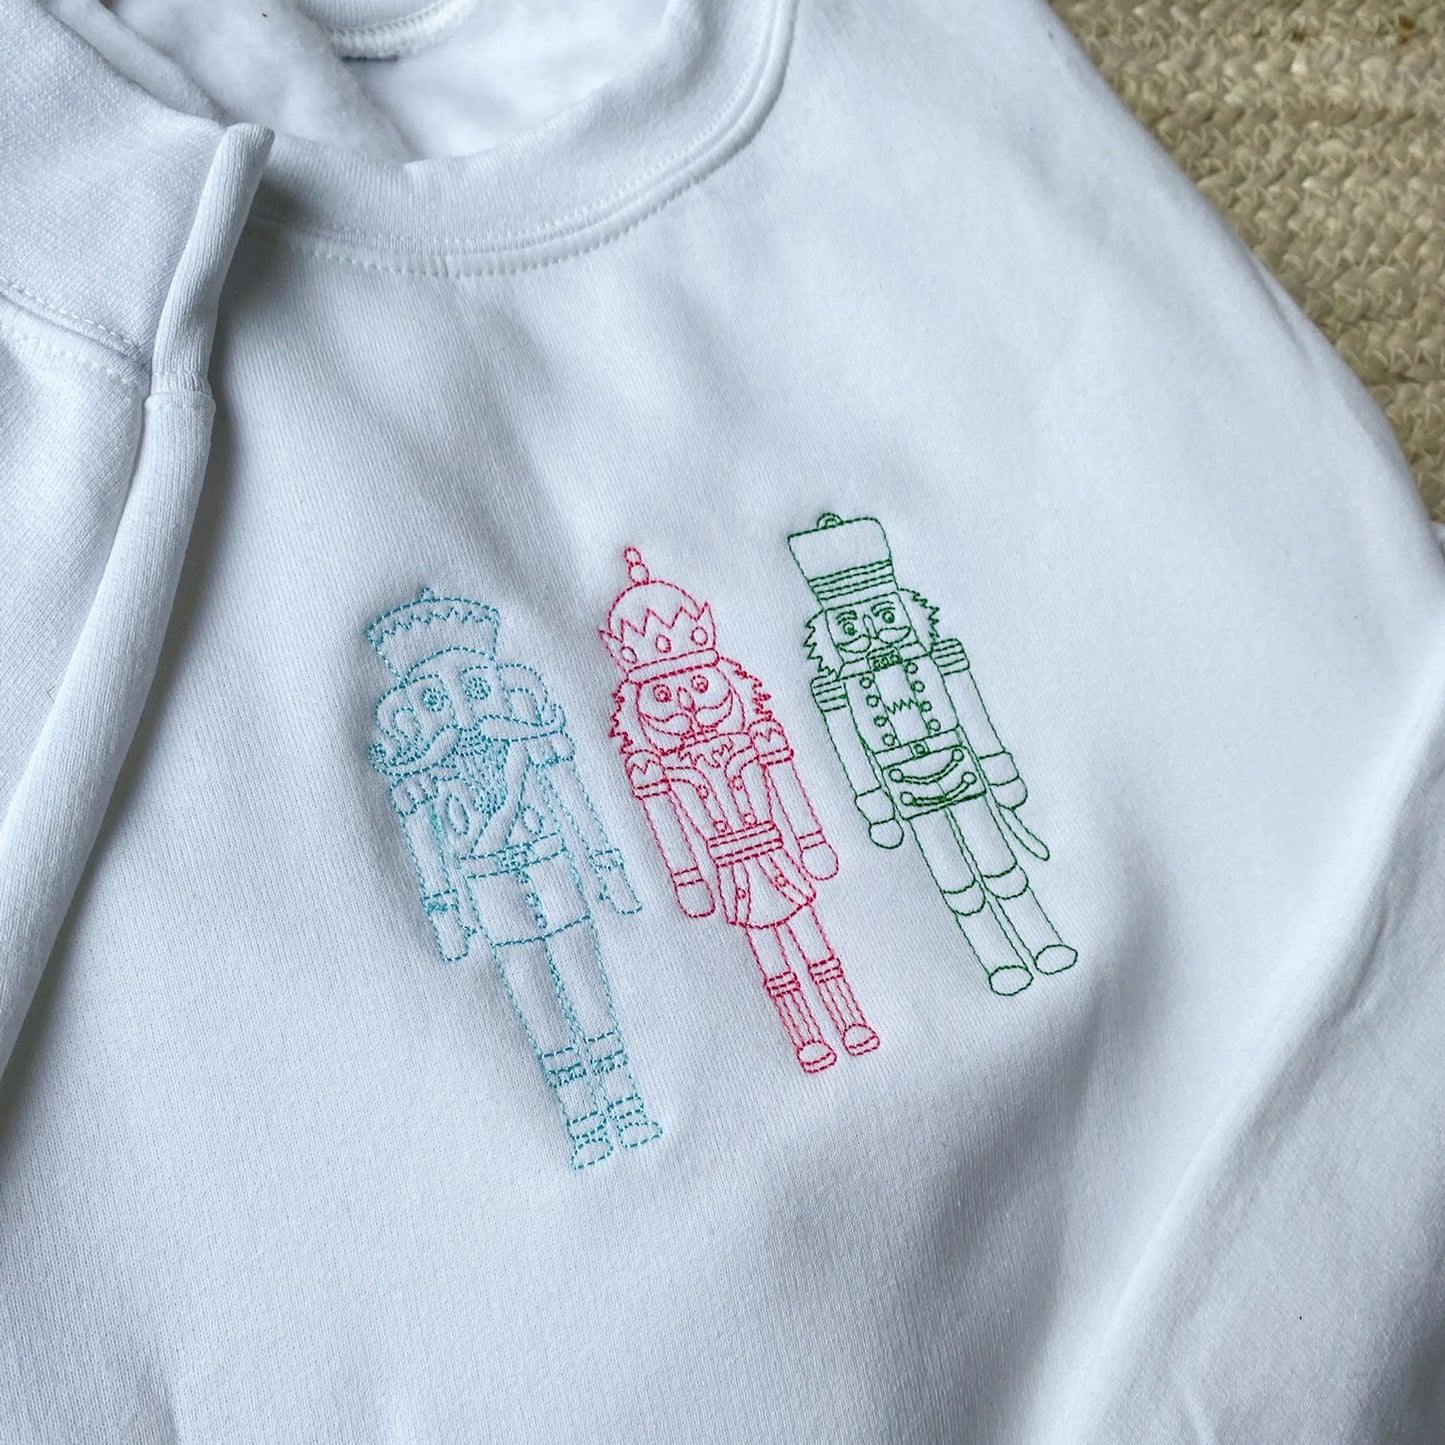 Up close image of a white crewneck sweatshirt featuring stitched embroidered nutcrackers across the chest in blue, pink, and green threads.